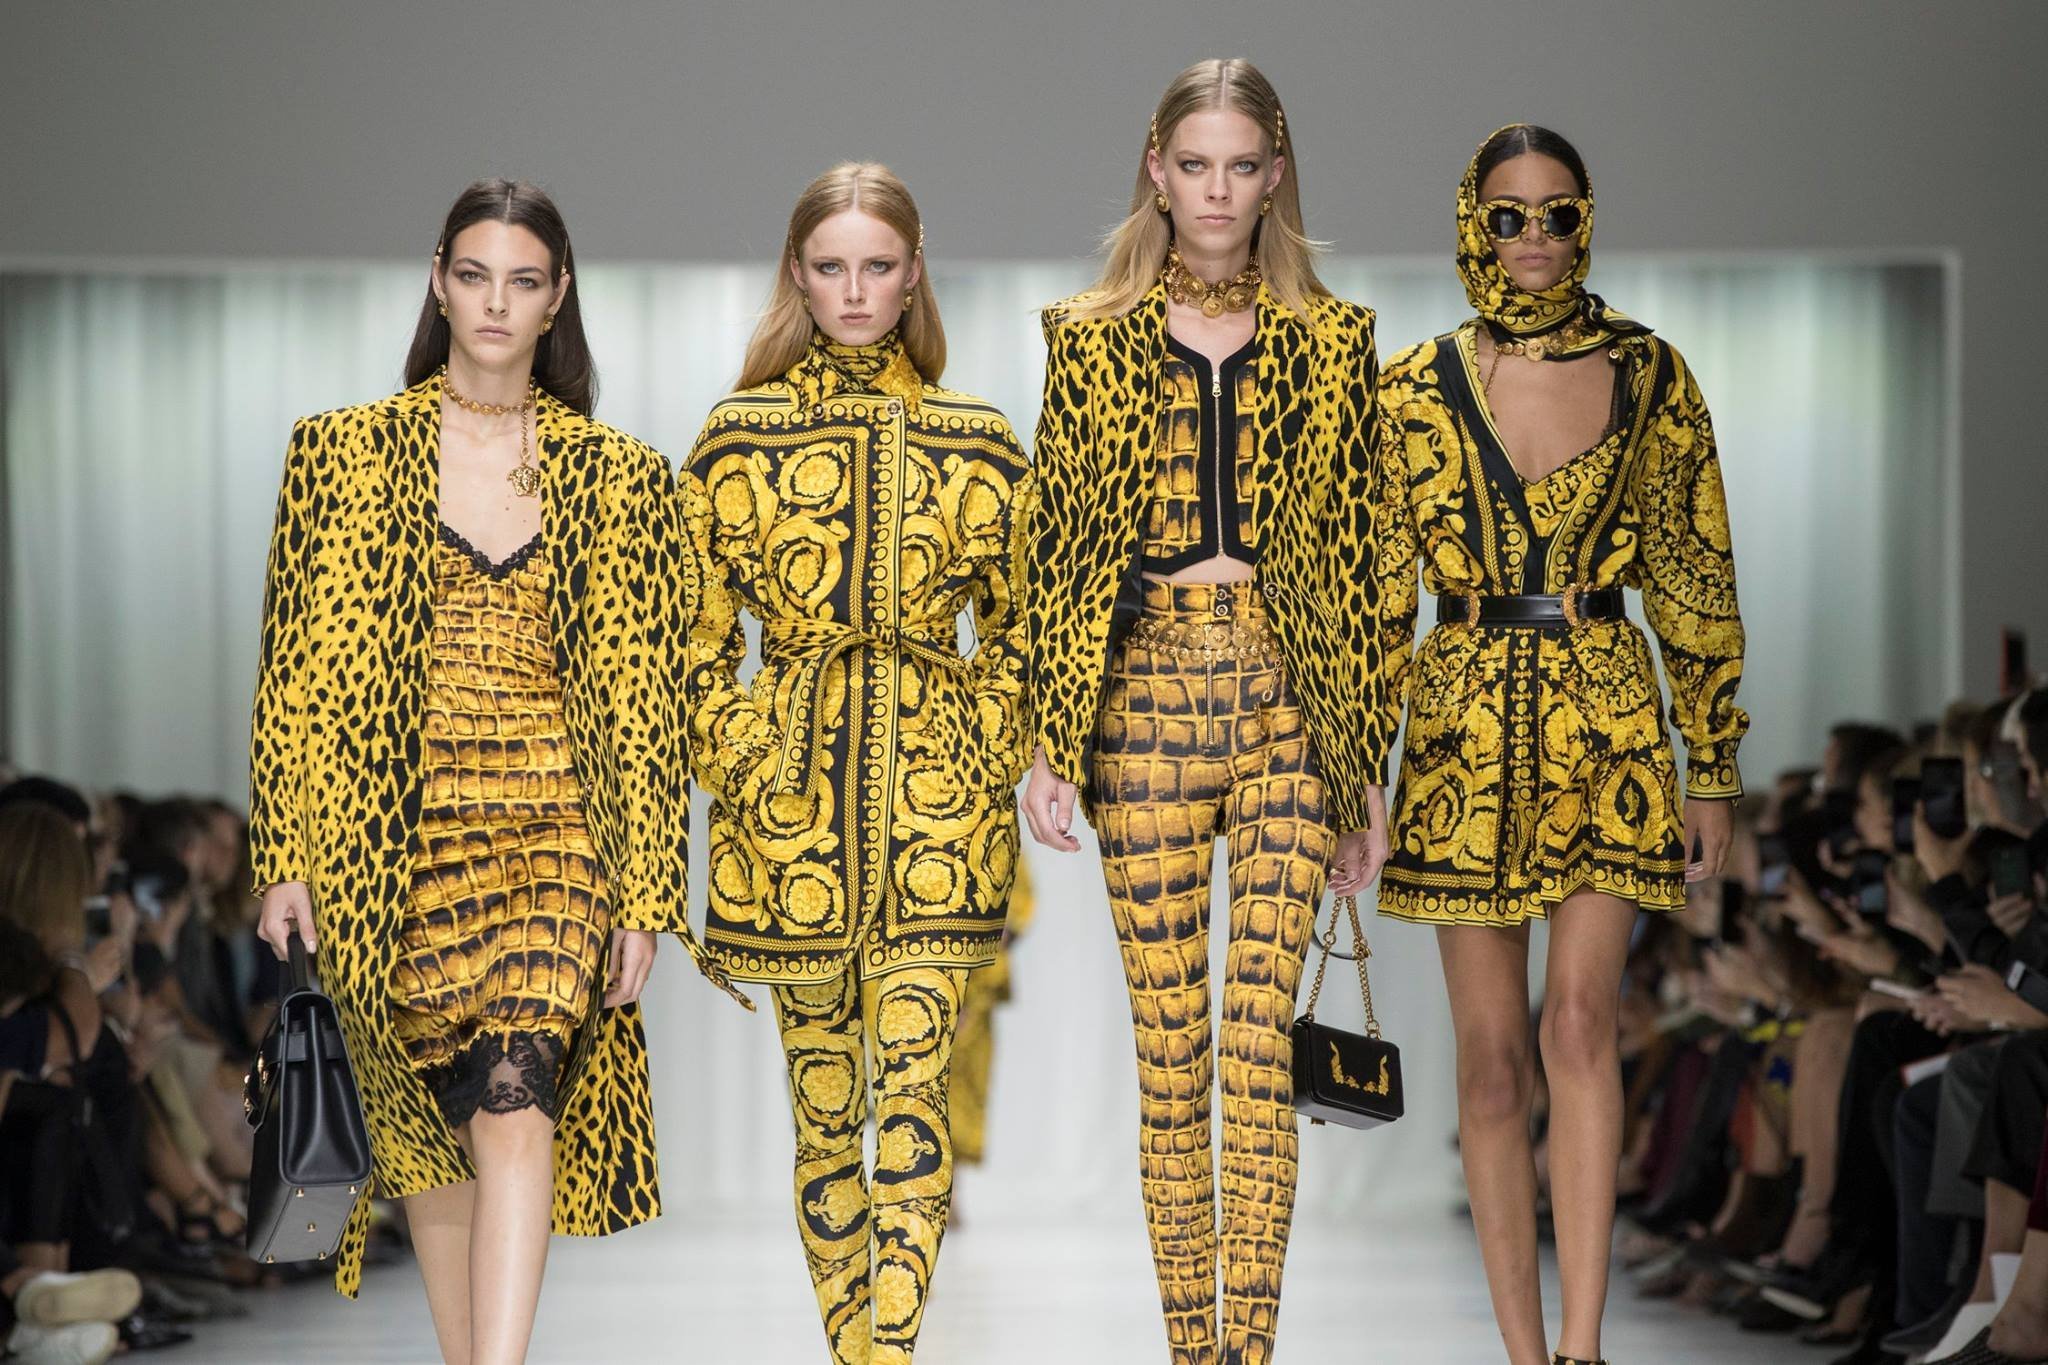 Versace collection. Джанни Версаче коллекции. Джанни Версаче коллекция 2018. Джанни Версаче одежда. Джанни Версаче платья.